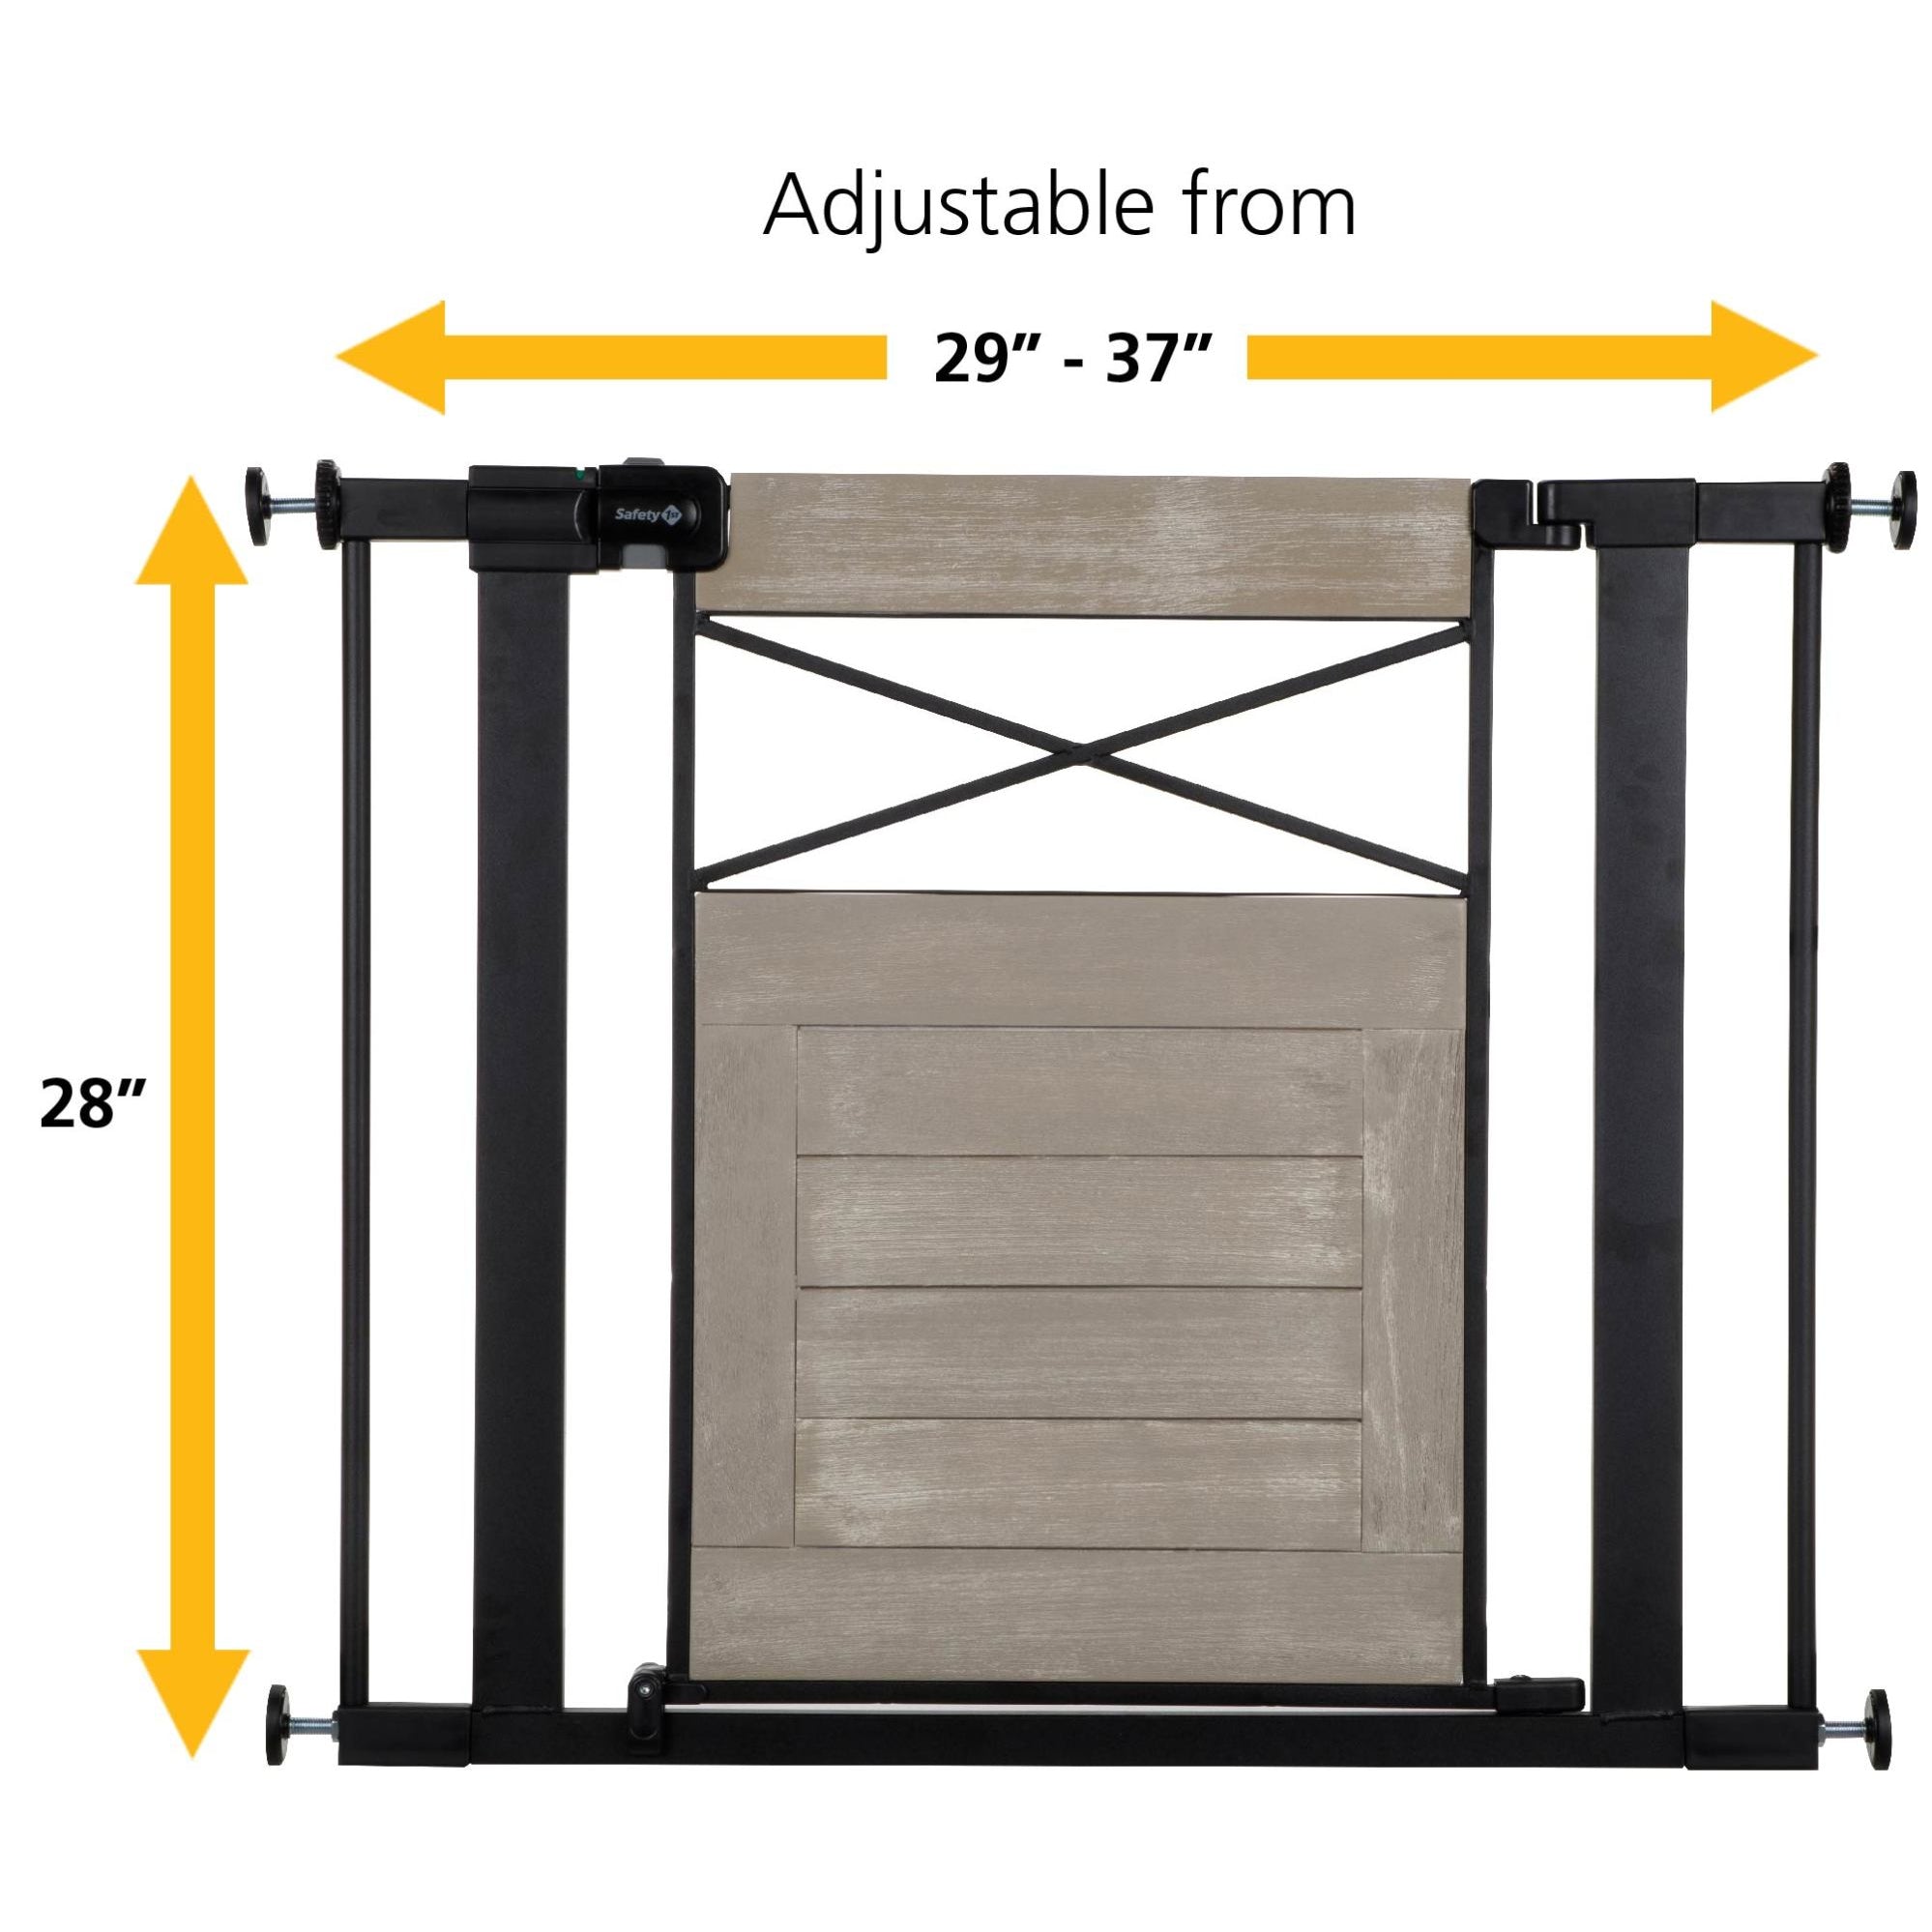 Farmhouse Walk-Through Gate (Grey) - with adjustable from 29" - 37"; height 28"